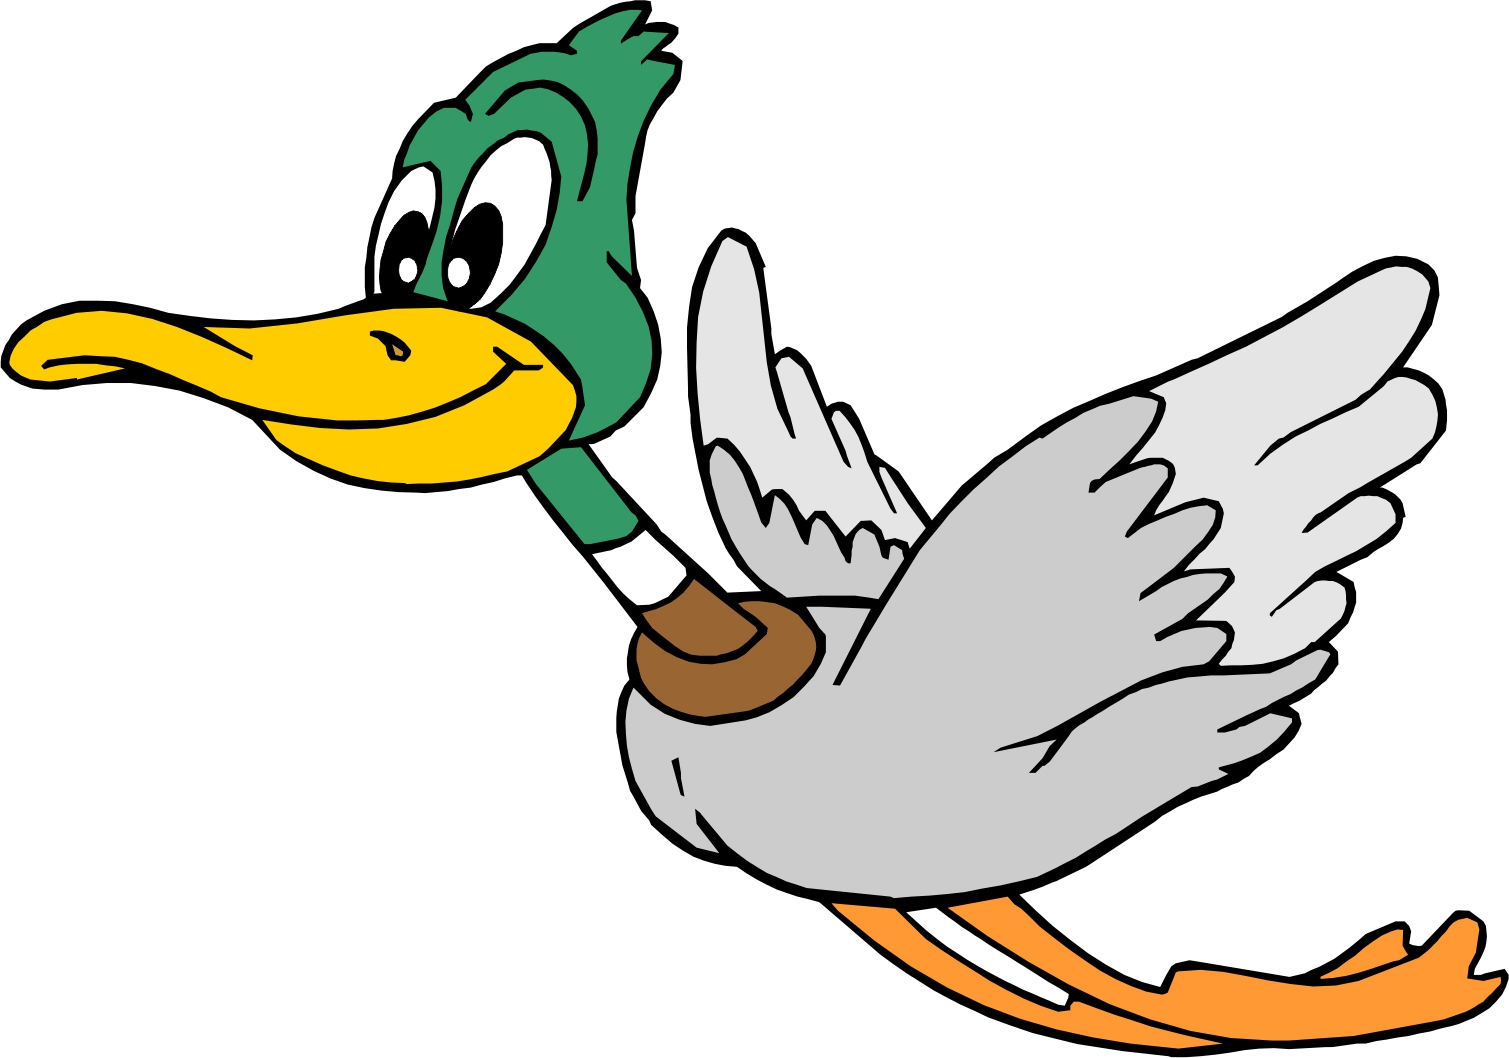 Flying duck clipart free clipart images